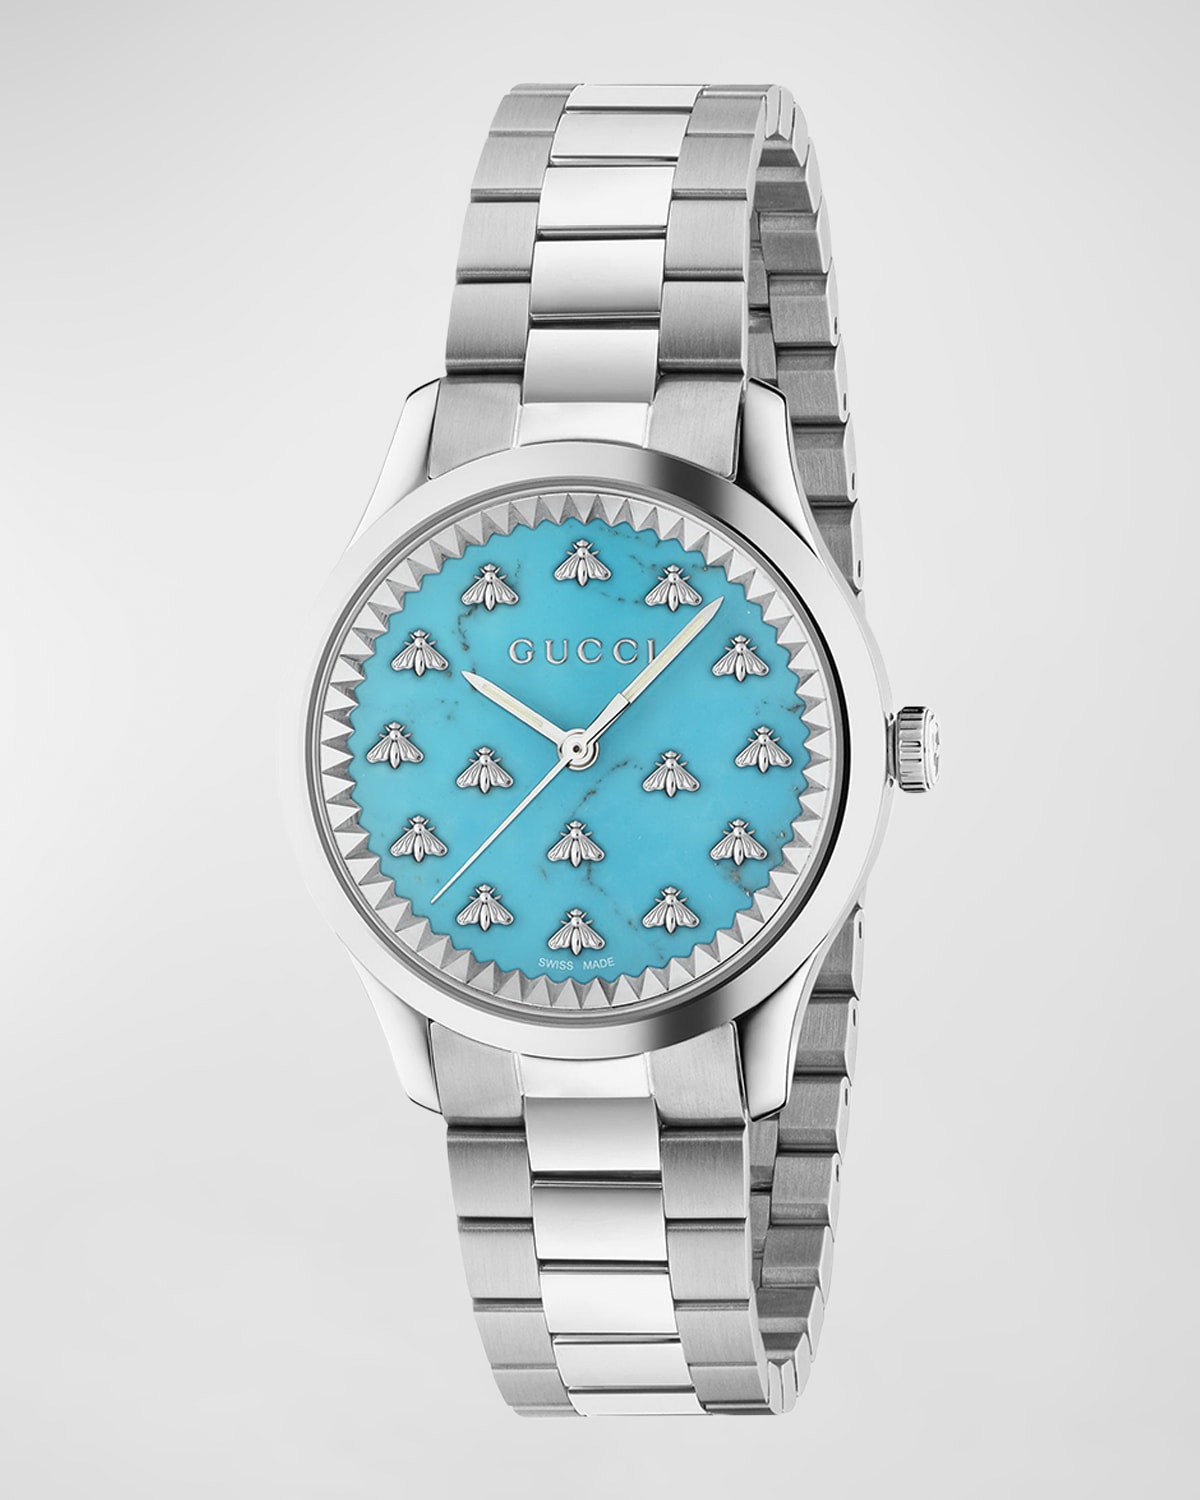 GUCCI SIGNATURE BEE AUTOMATIC BRACELET WATCH WITH TURQUOISE DIAL